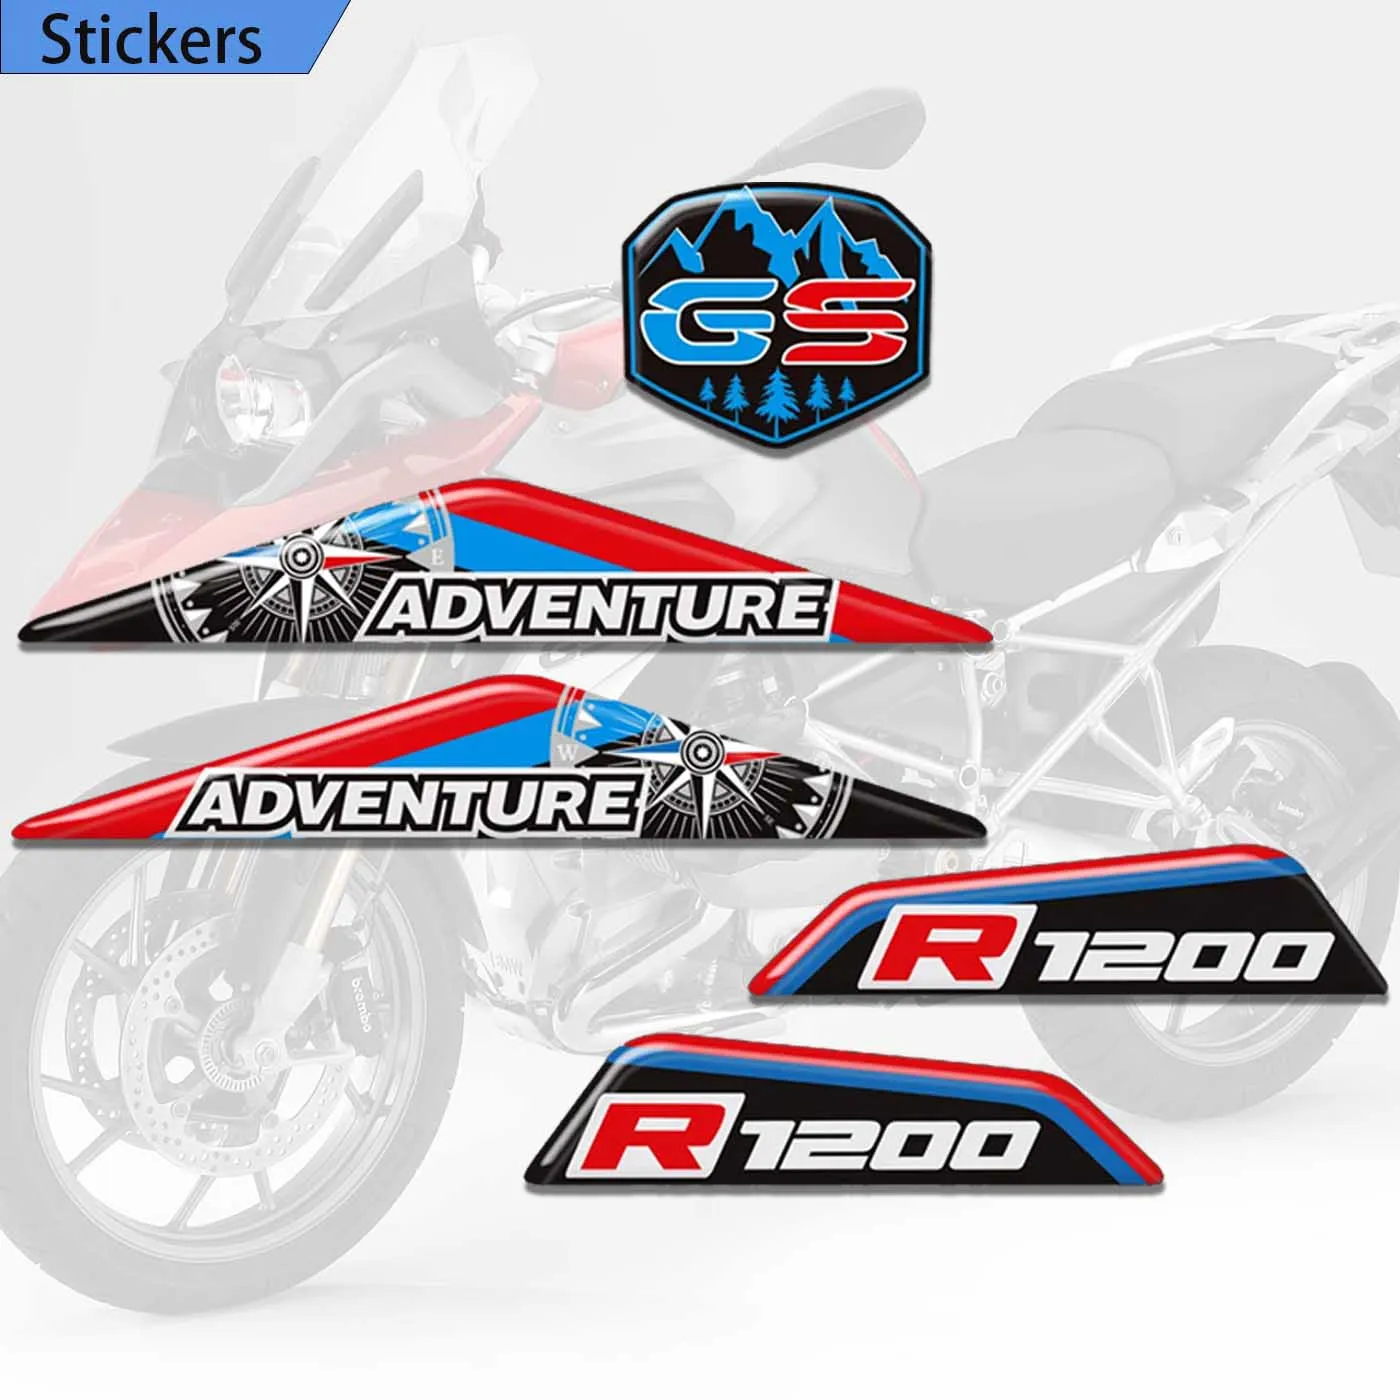 motorcycle stickers decal for bmw r1200gs lc adv r 1200 gs adventure front beak fairing extension wheel extender cover gsa 2019 For BMW R1200GS LC ADV R 1200 GS Motorcycle Stickers Front Beak Fairing Extension Wheel Extender Cover